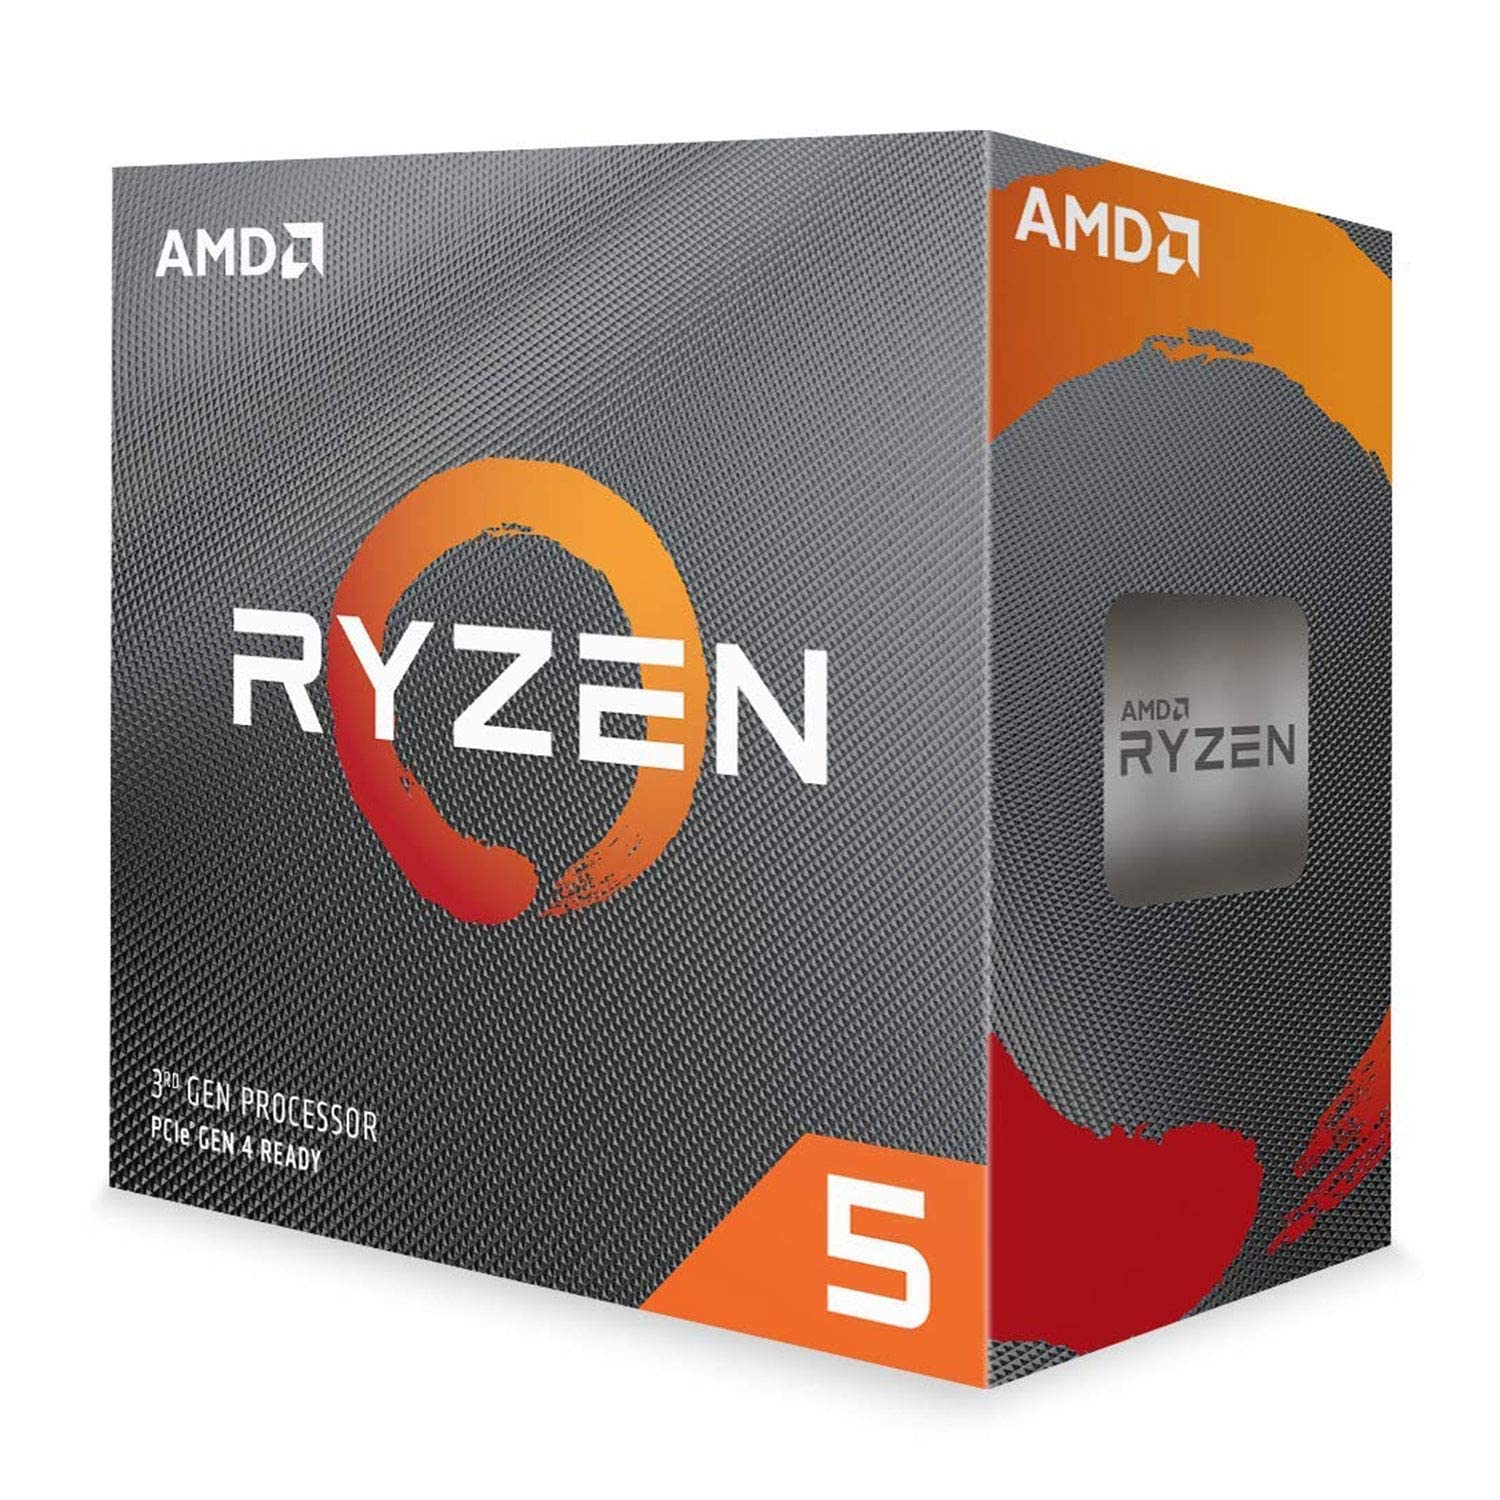 You are currently viewing Comparing Ryzen 5 5500 and 5600X Processors